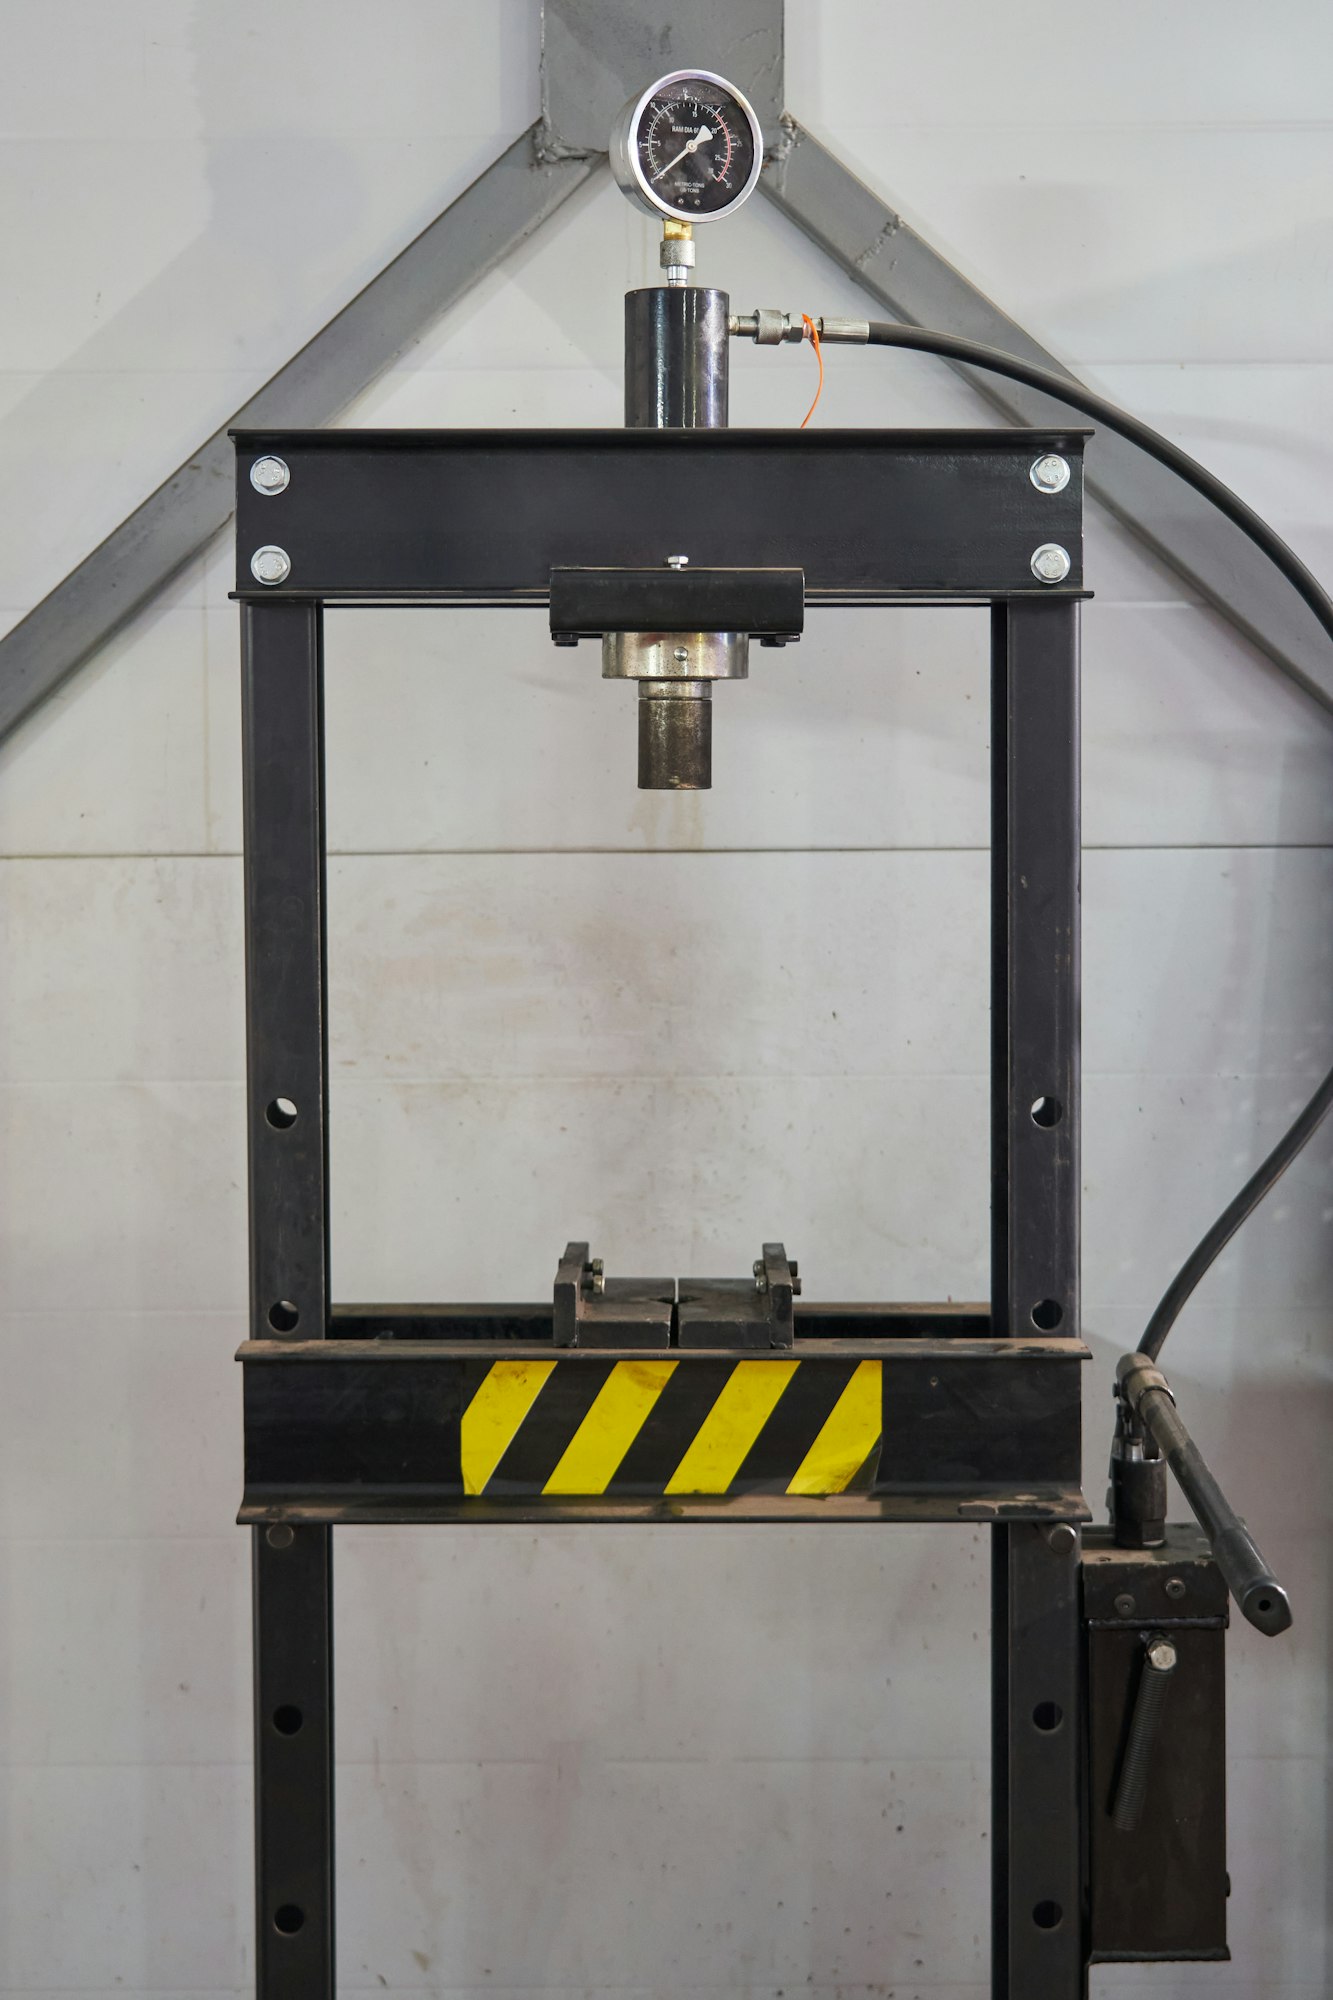 black floor press with manual hydraulic drive. equipped with a pressure gauge